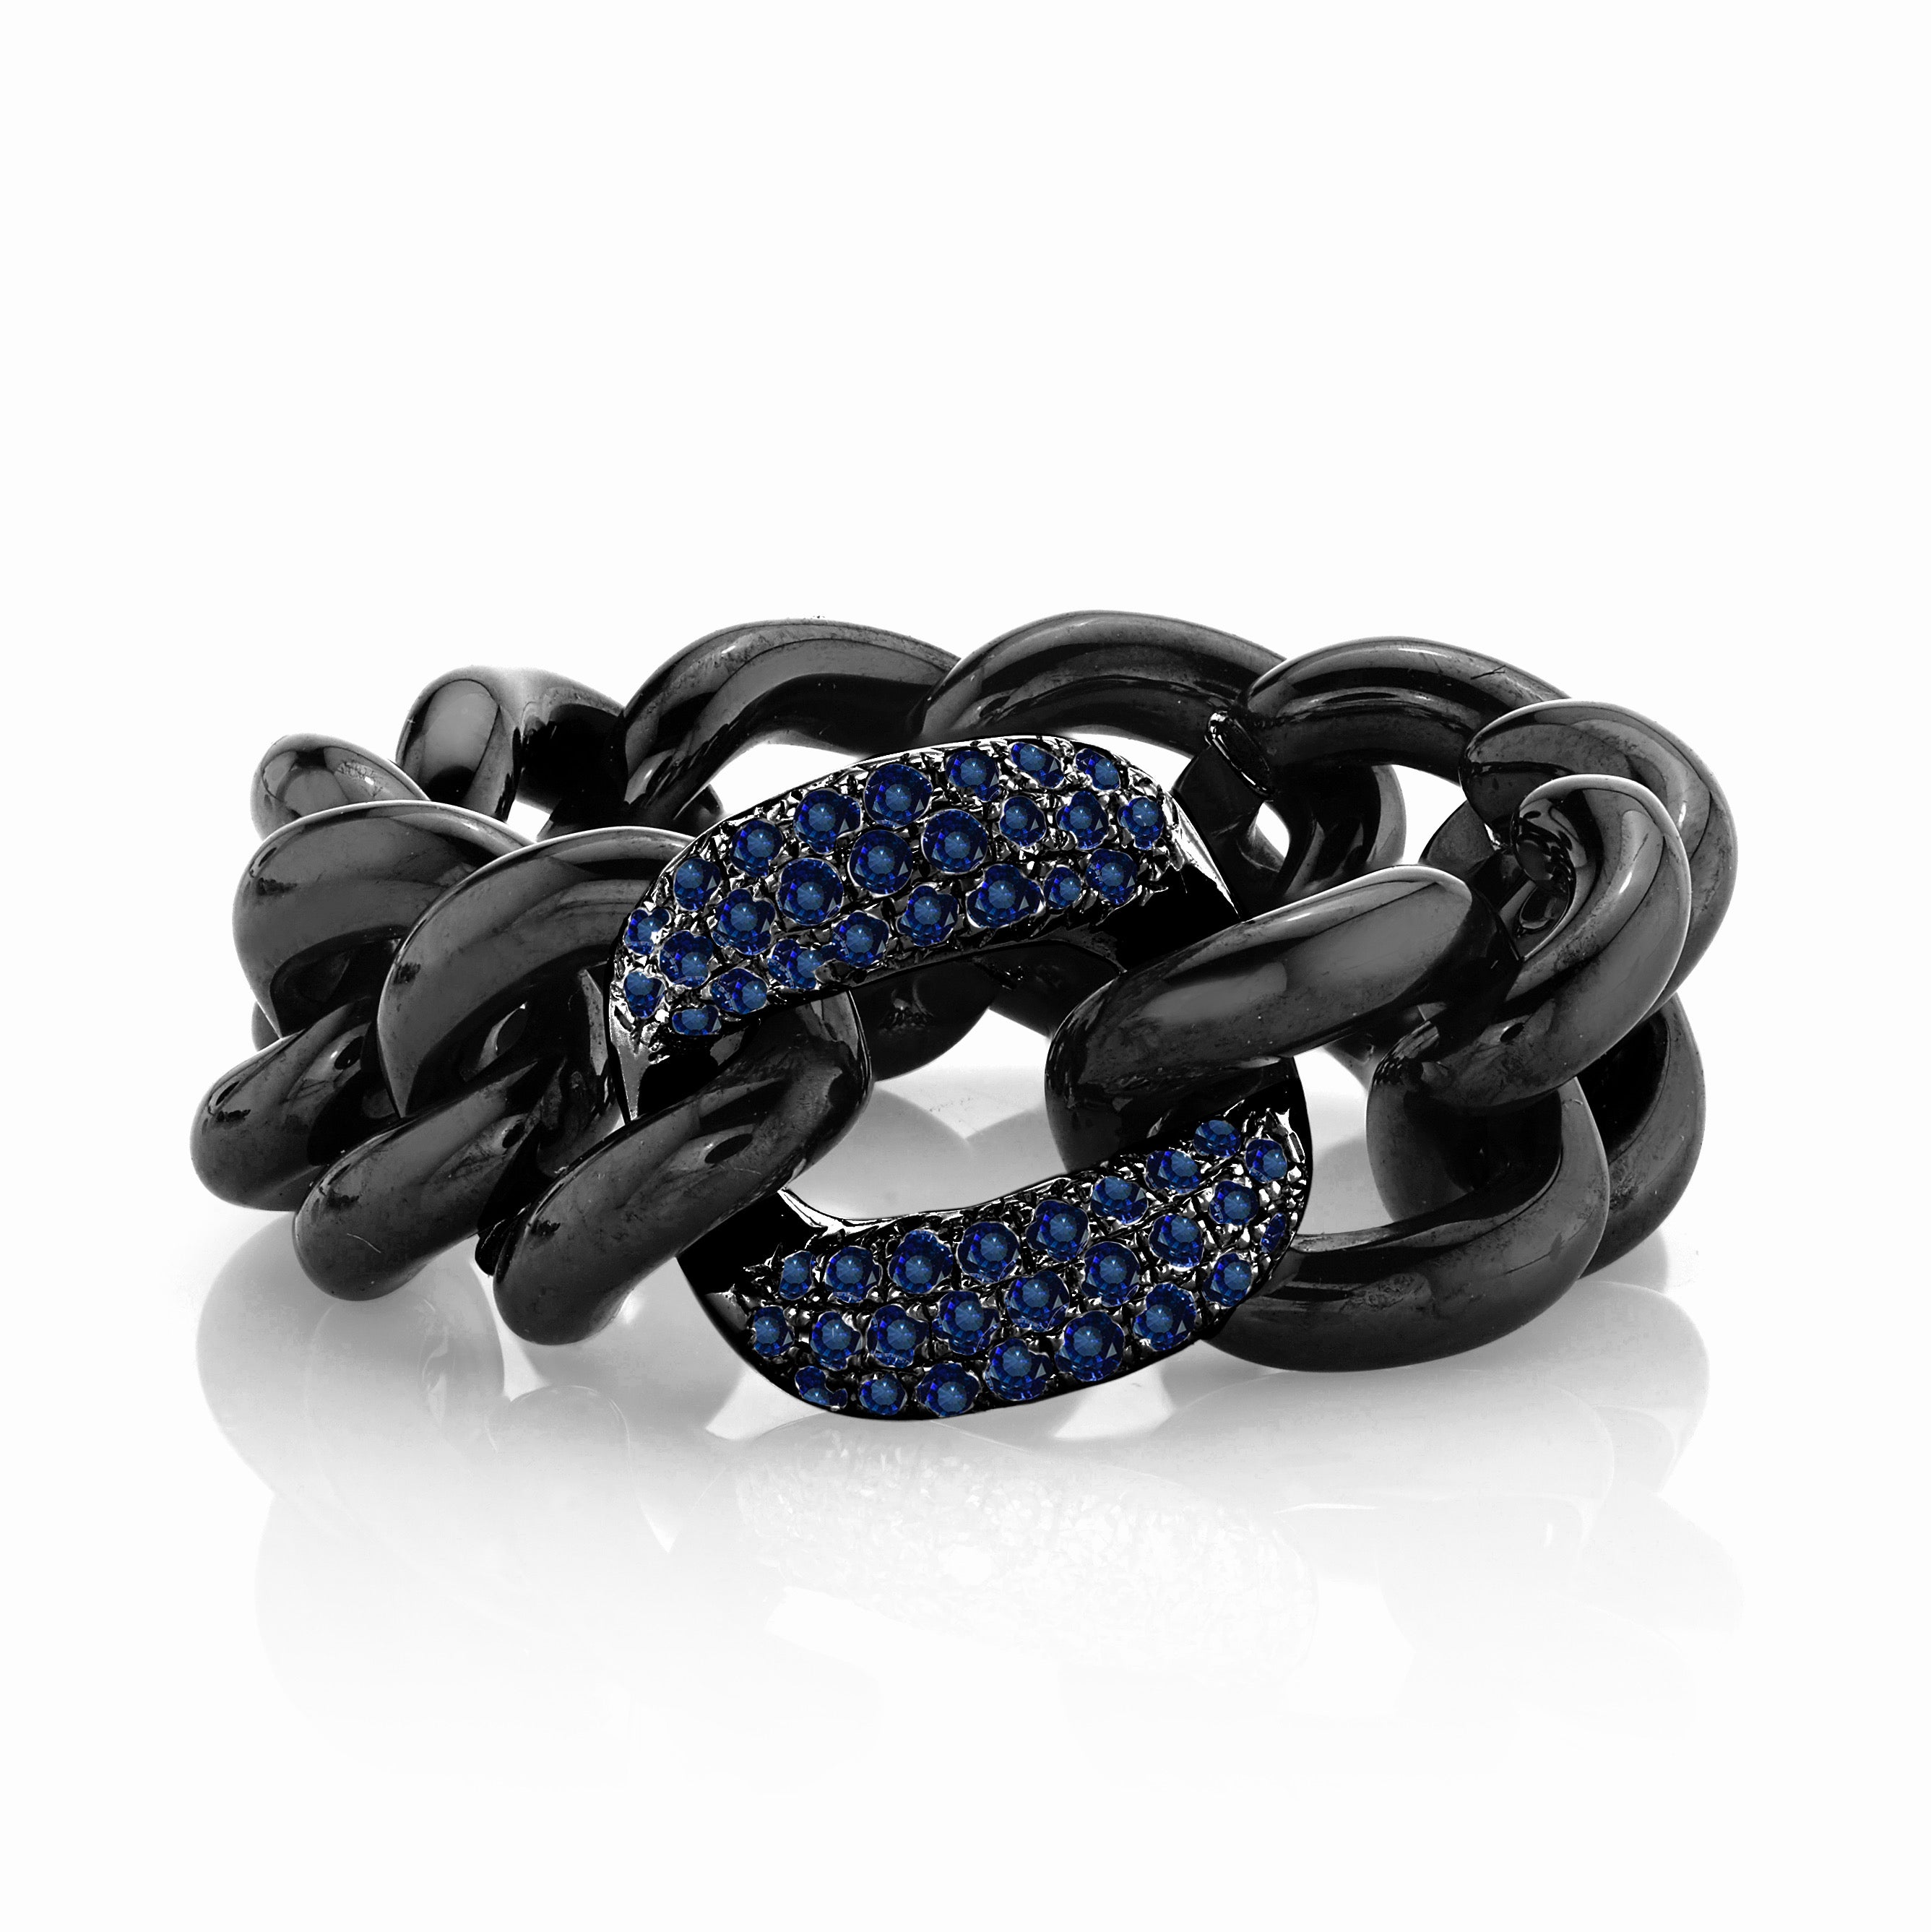 Double bracelet with Italian leather and 4mm Blue Sodalite stone – Gemini  Official